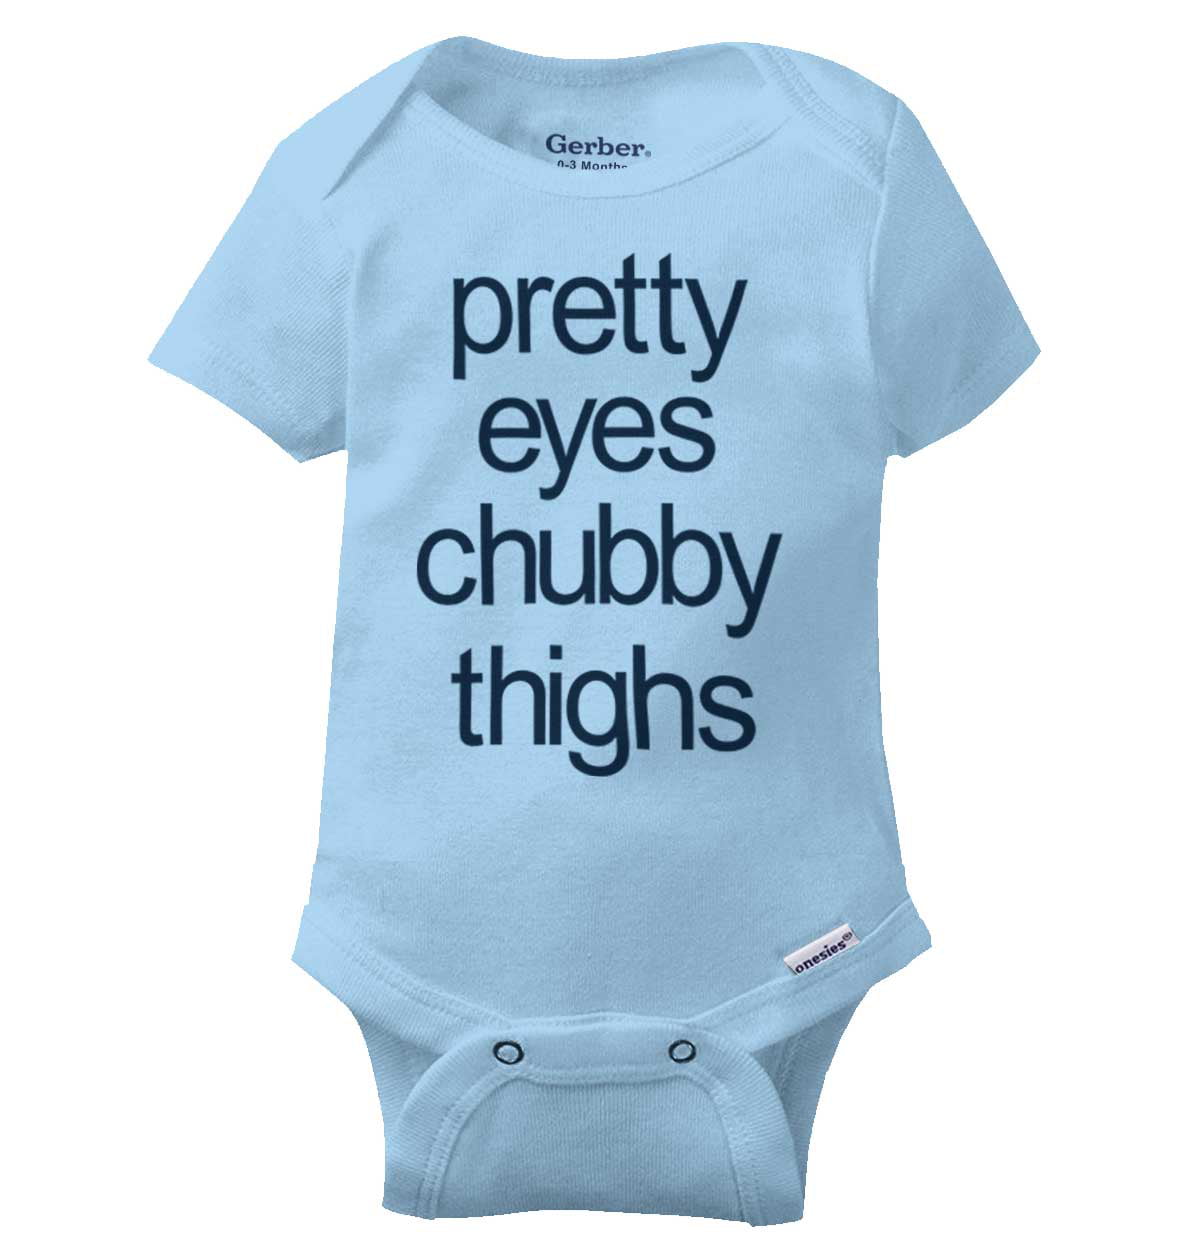 Pretty Eyes Chubby Thighs Gerber OnesieAdorable Chunky Beautiful Baby Romper 